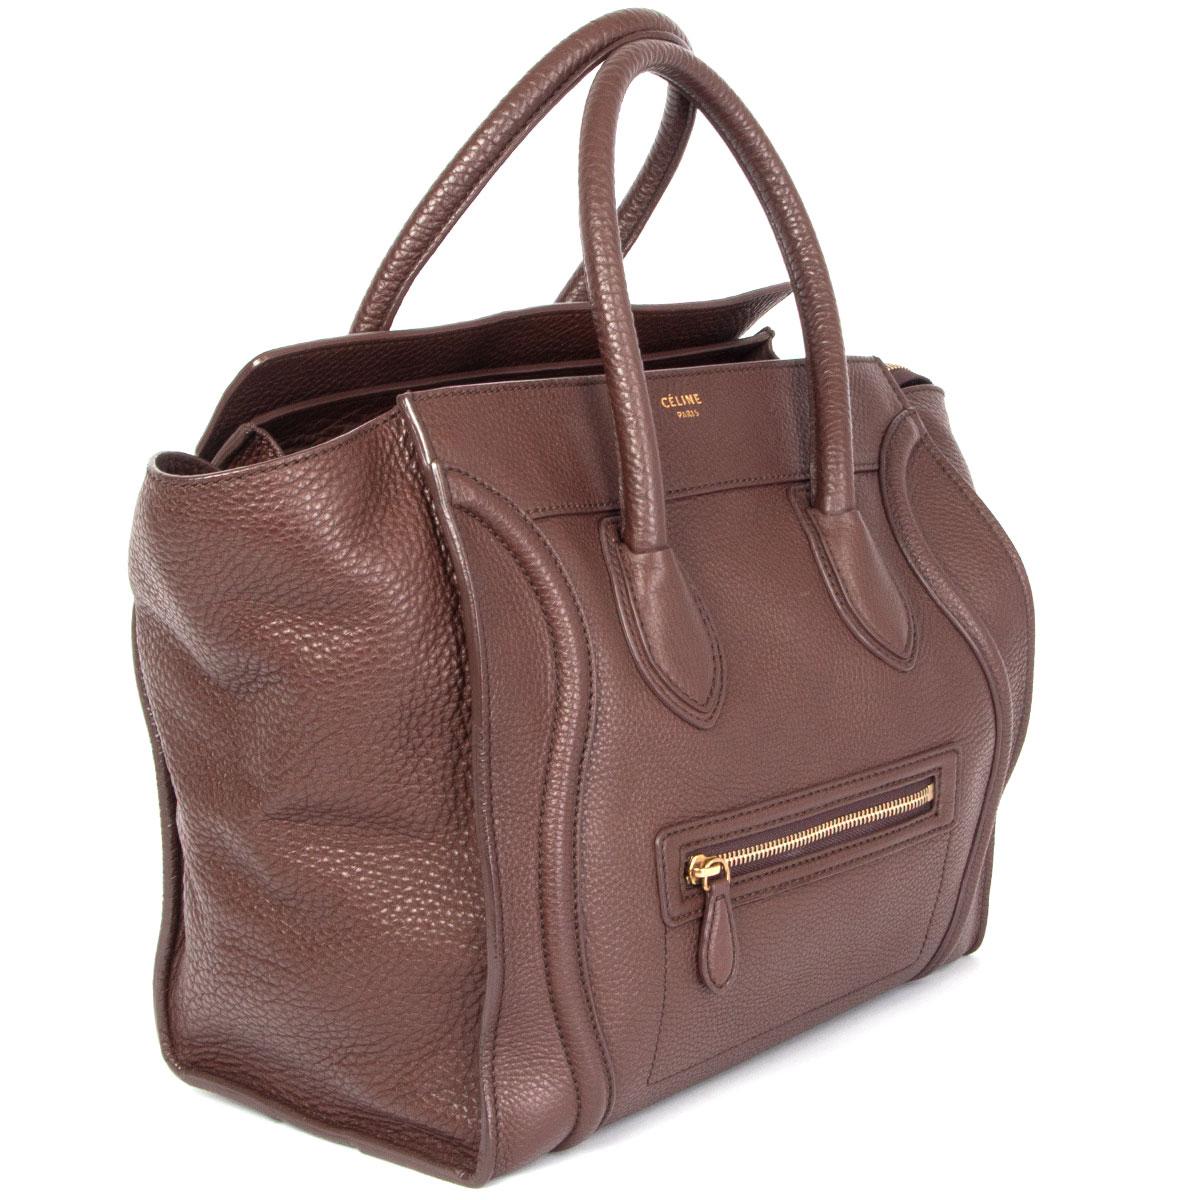 100% authentic Céline Mini Luggage tote bag in chocolate brown grained calfskin. Lined in dark brown microfibre with one zipper pocket against the back and two open pockets against the front. Has been carried and is in excellent condition.